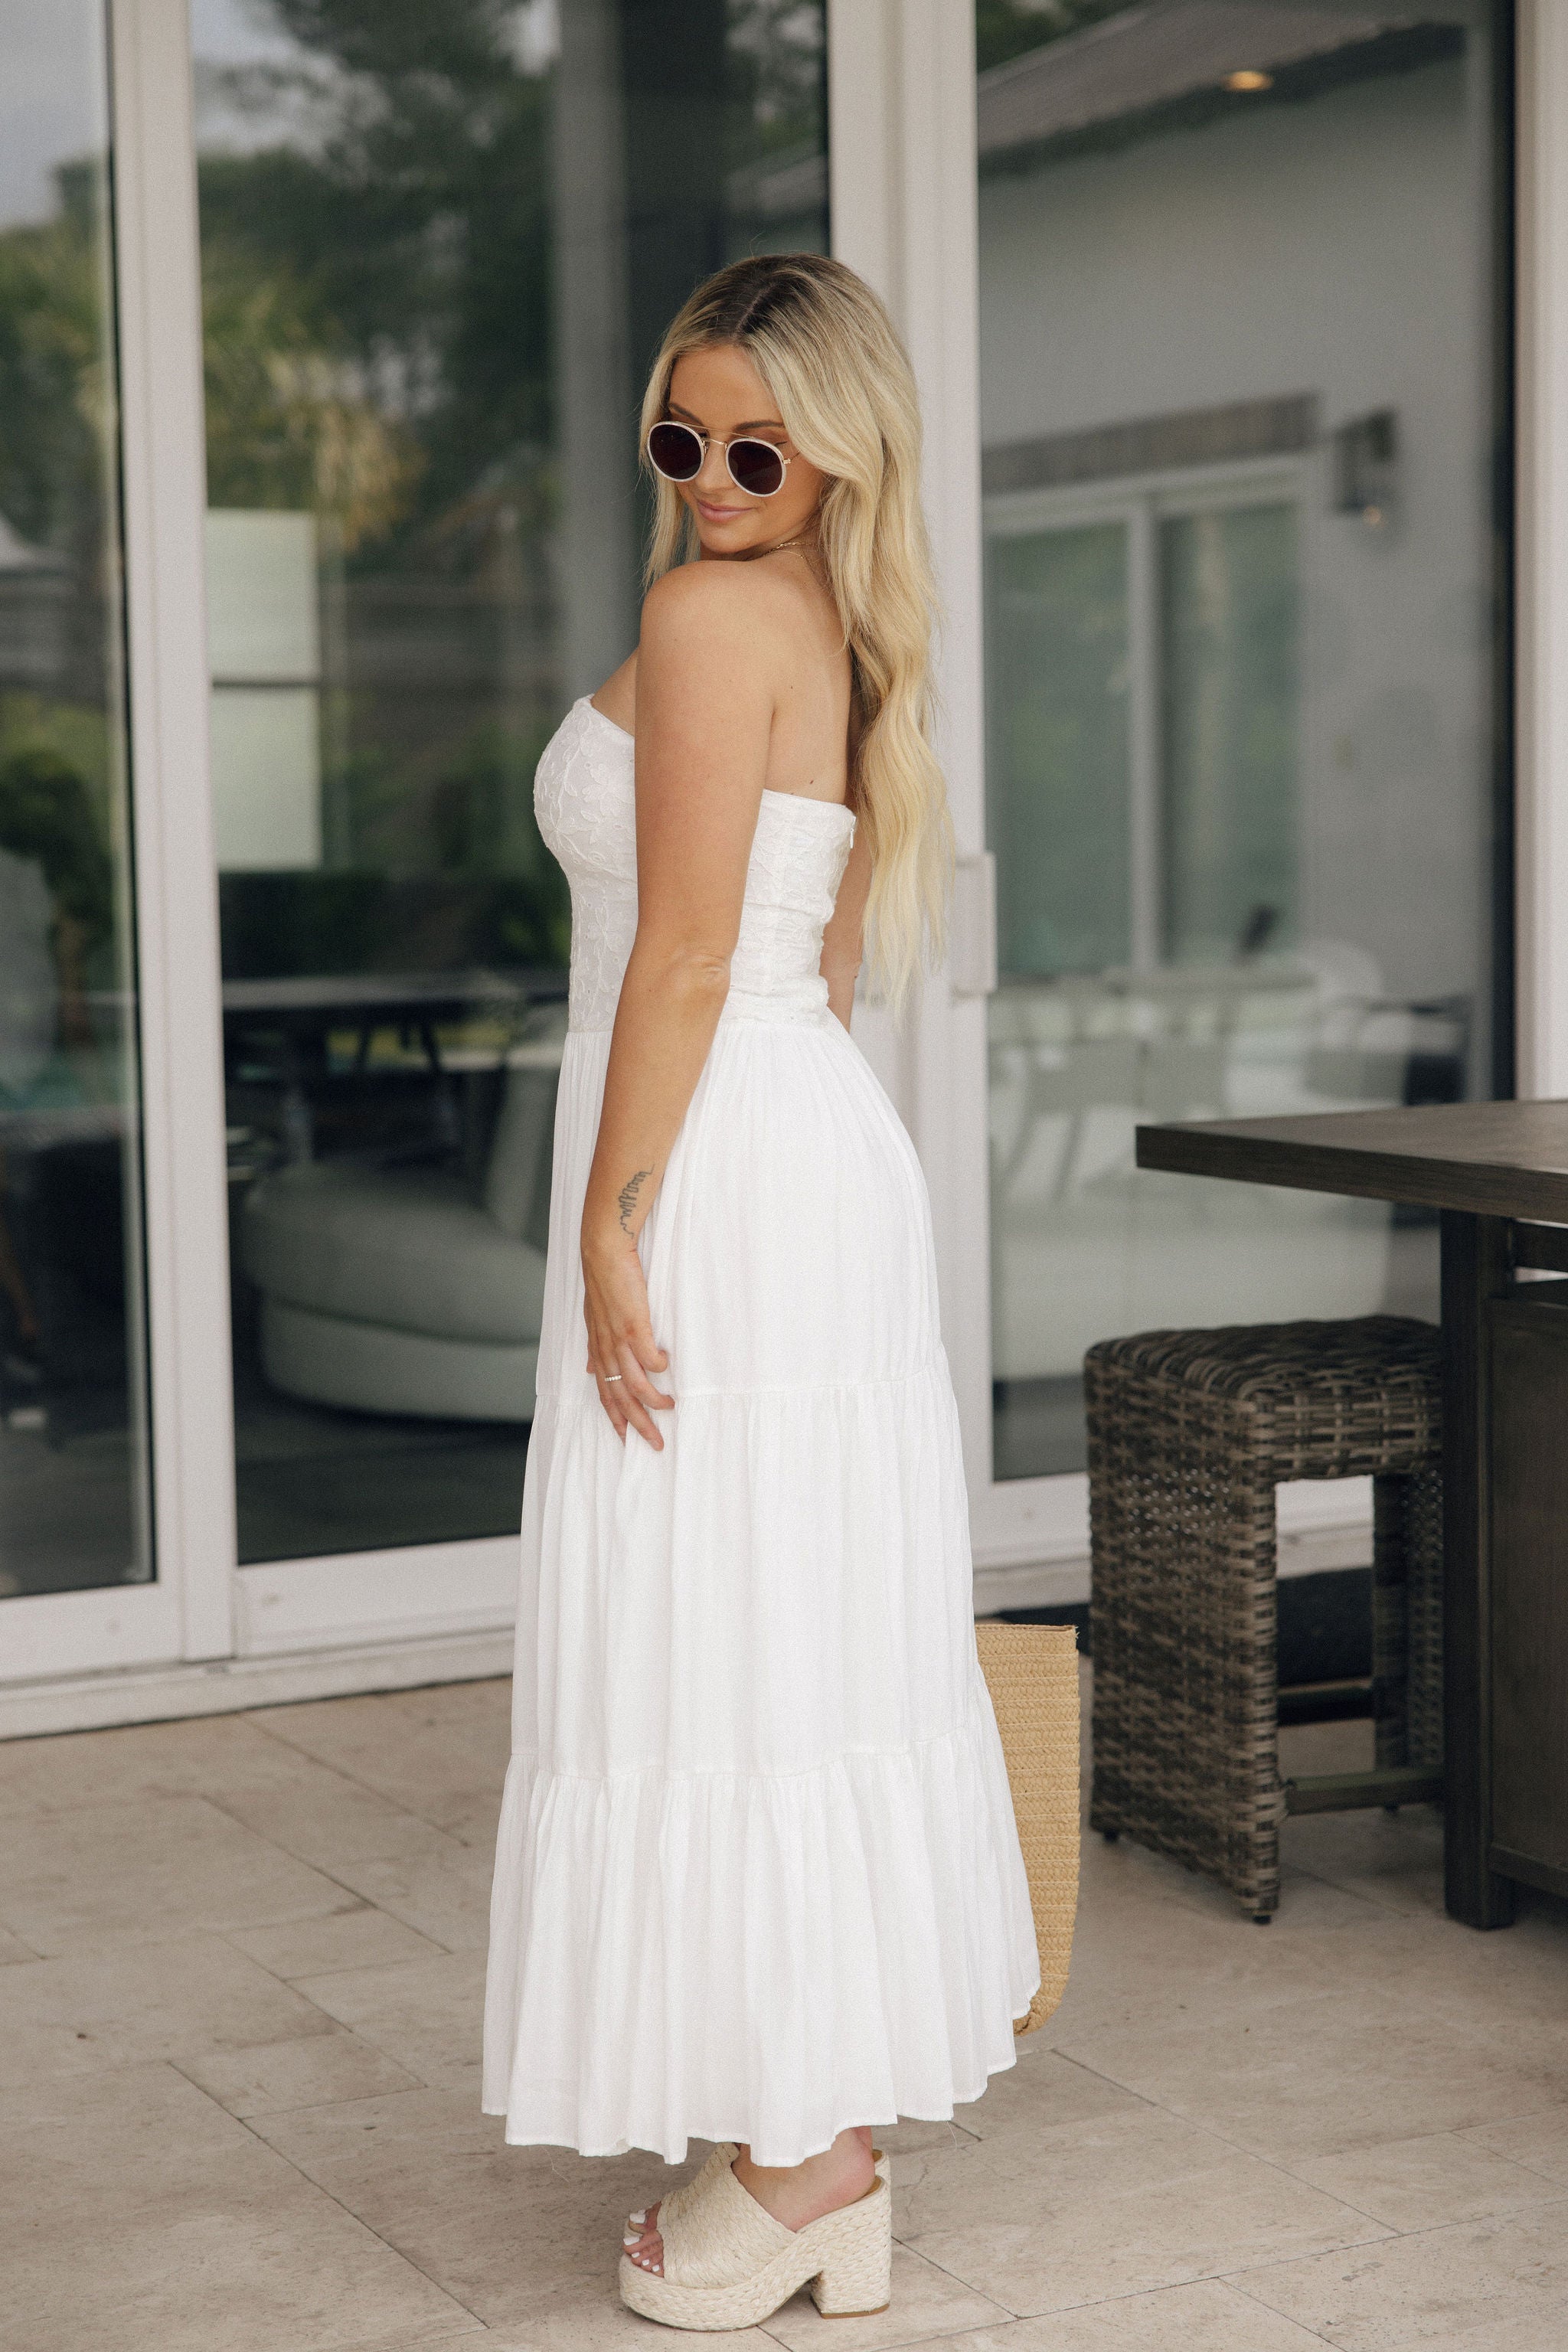 Full body side view of model wearing the Paloma White Eyelet Strapless Maxi Dress that has a strapless upper with eyelet and floral details and a tiered maxi skirt.